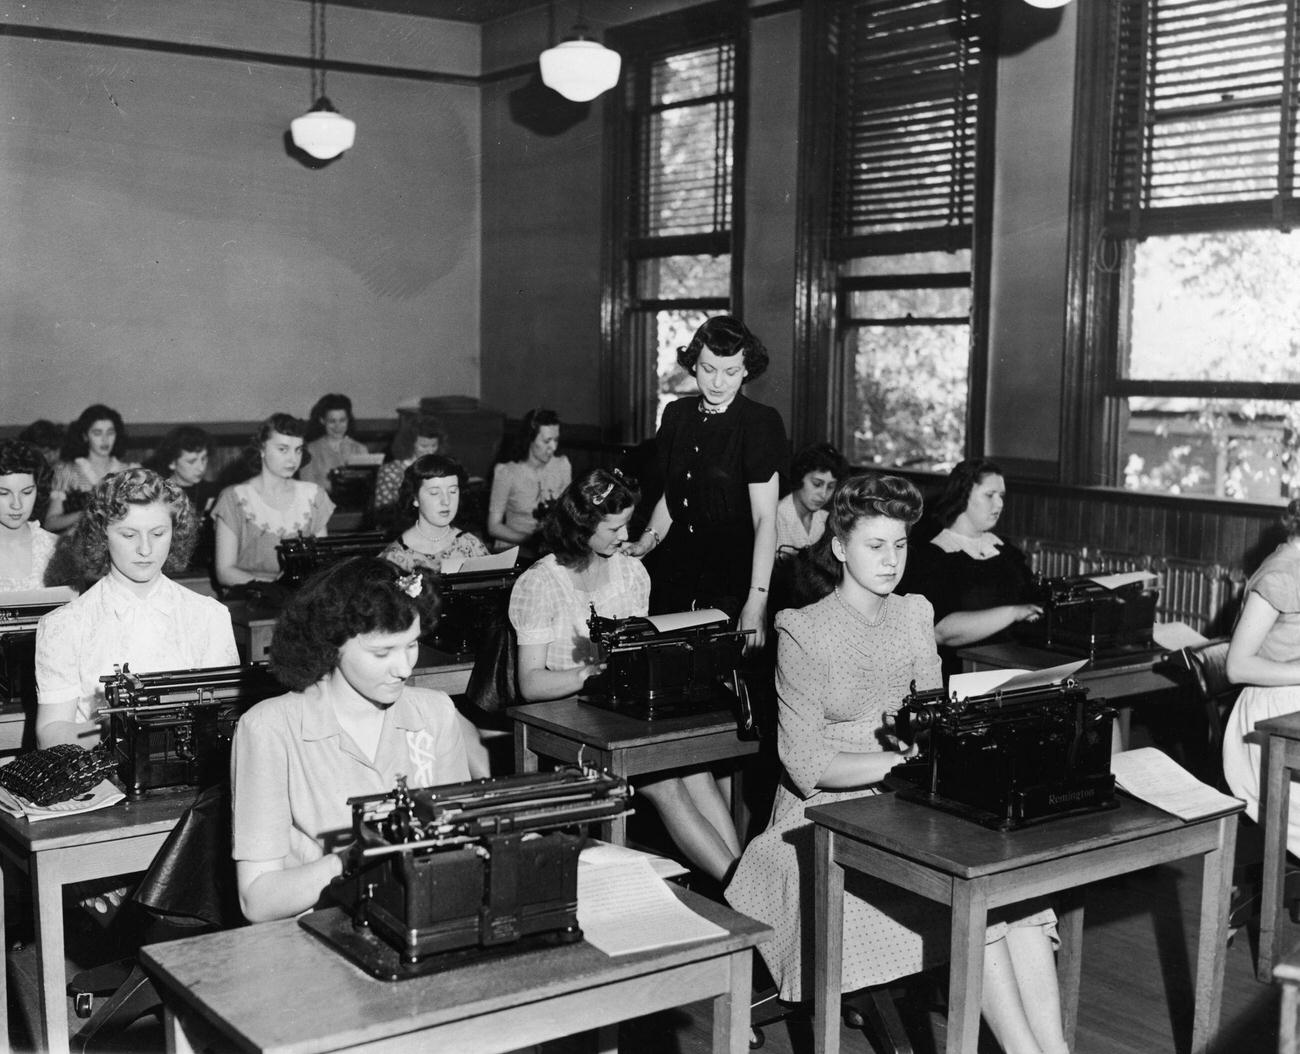 Typing Class in Session, Olyphant, Pennsylvania, 1940